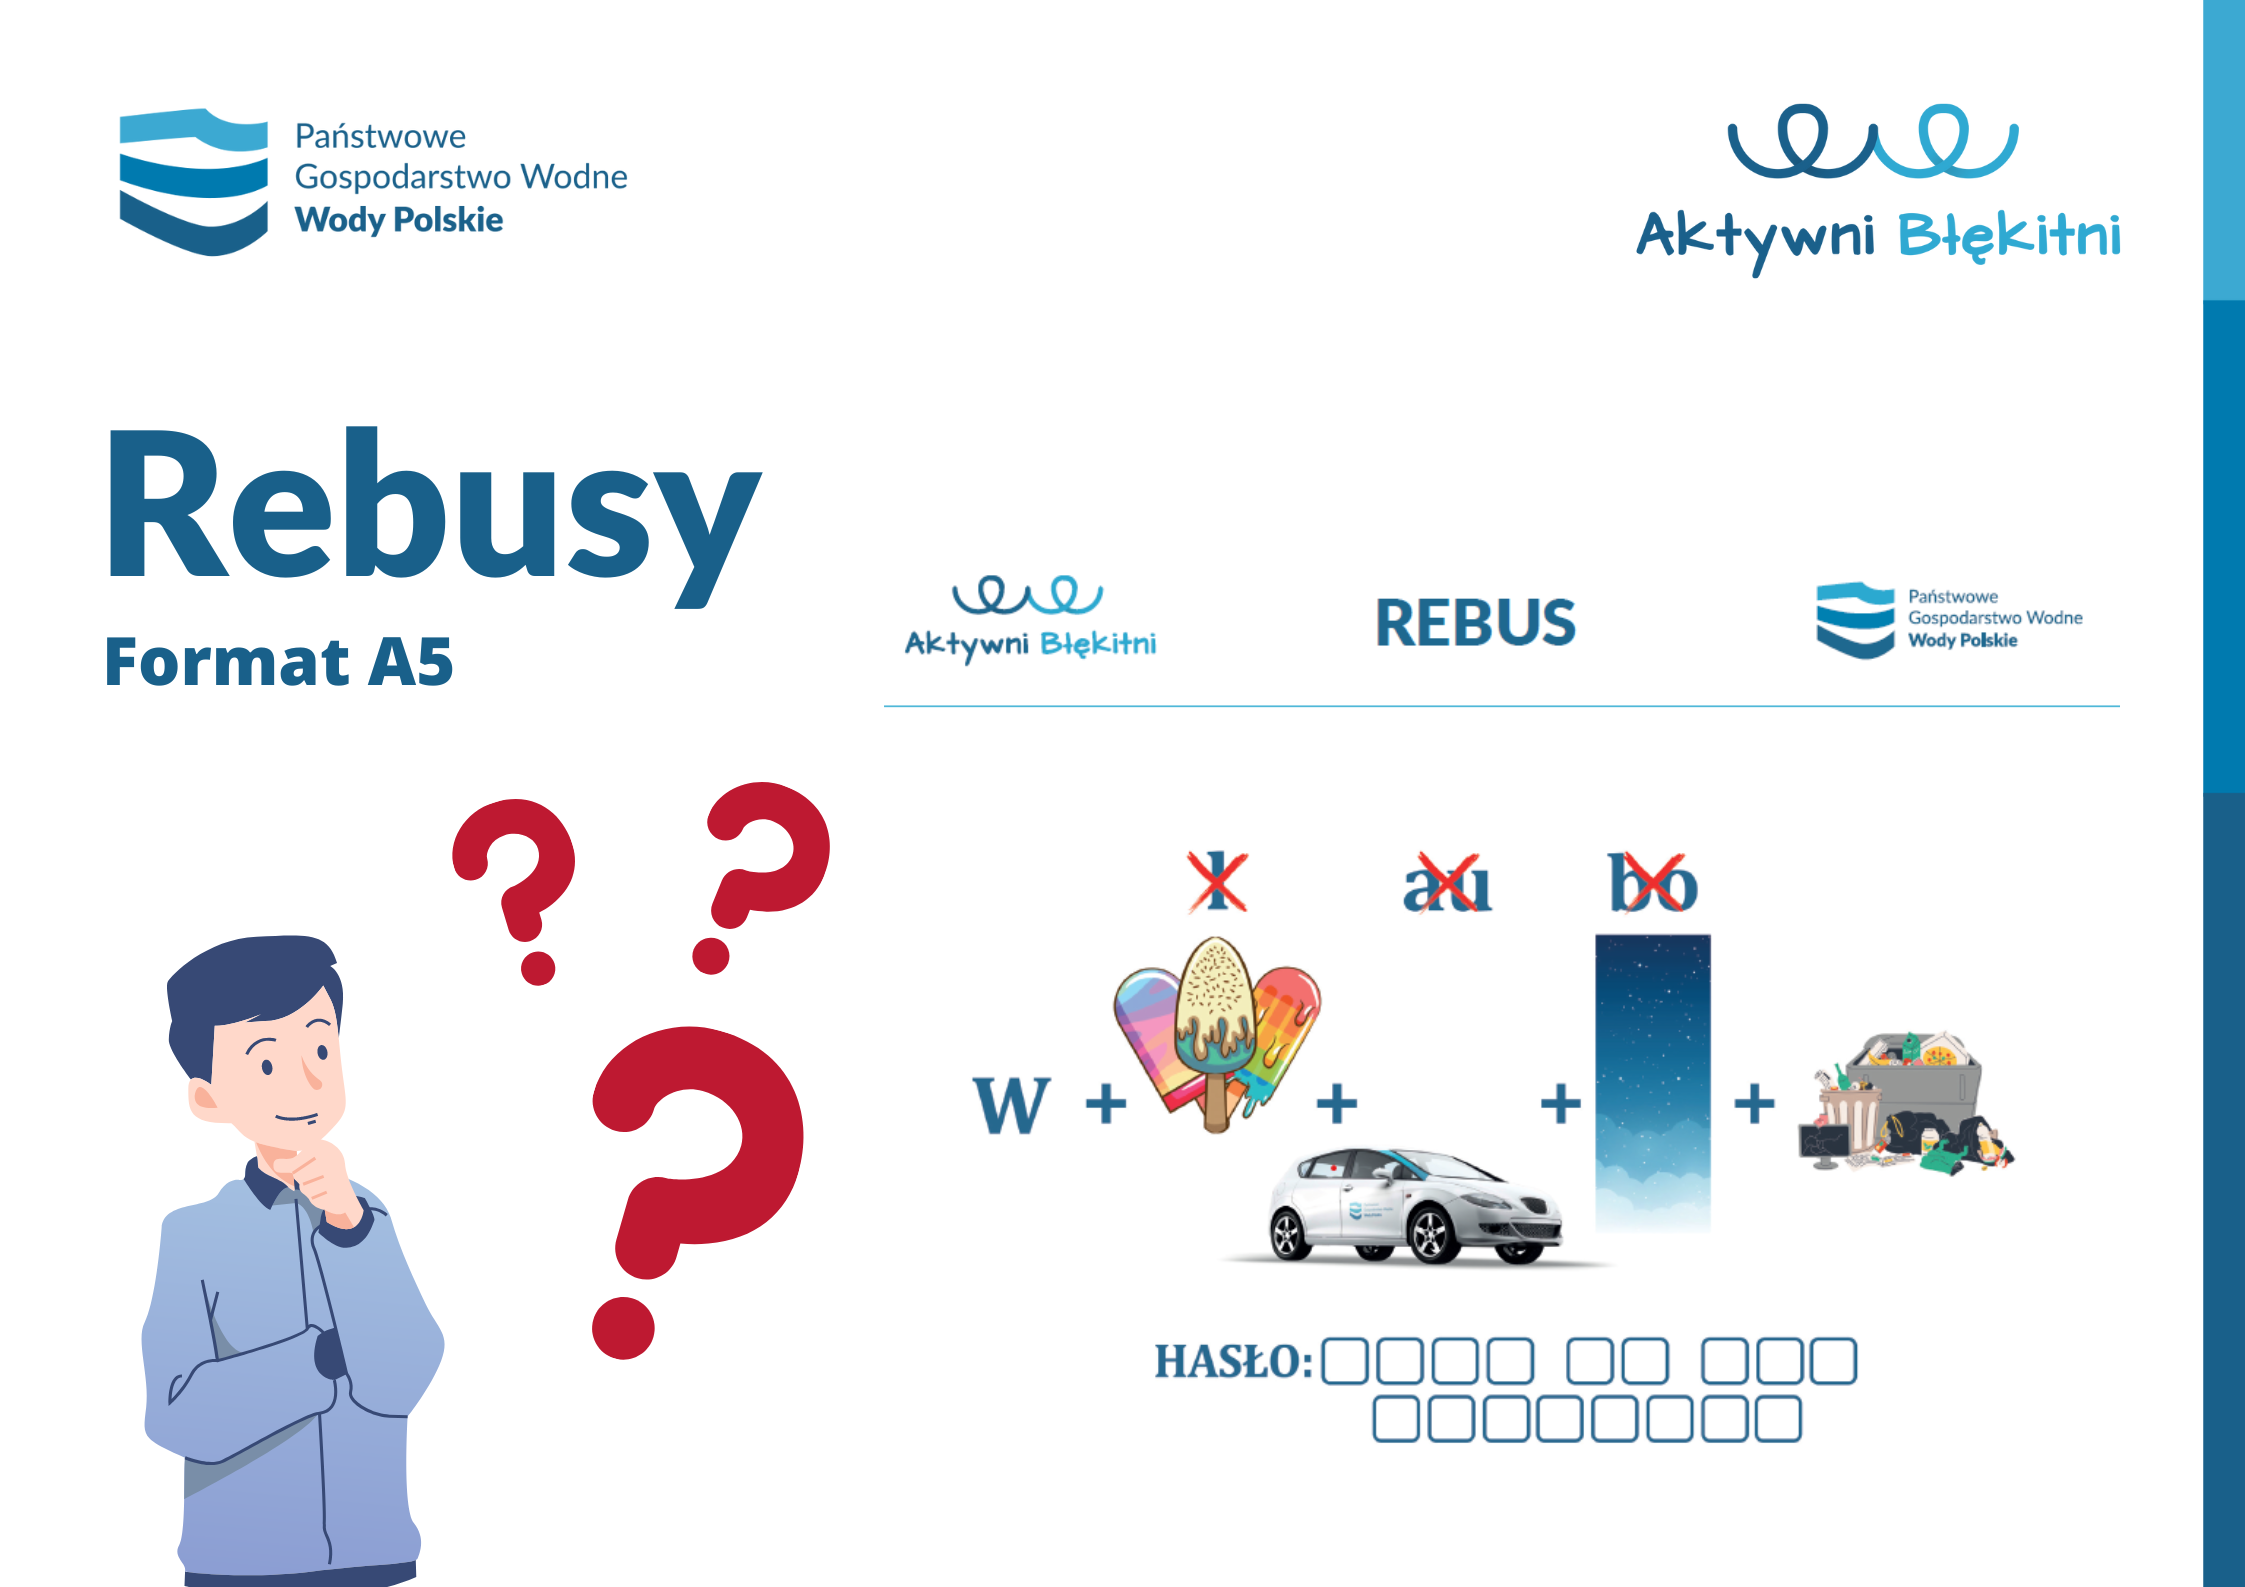 Rebusy - format A5